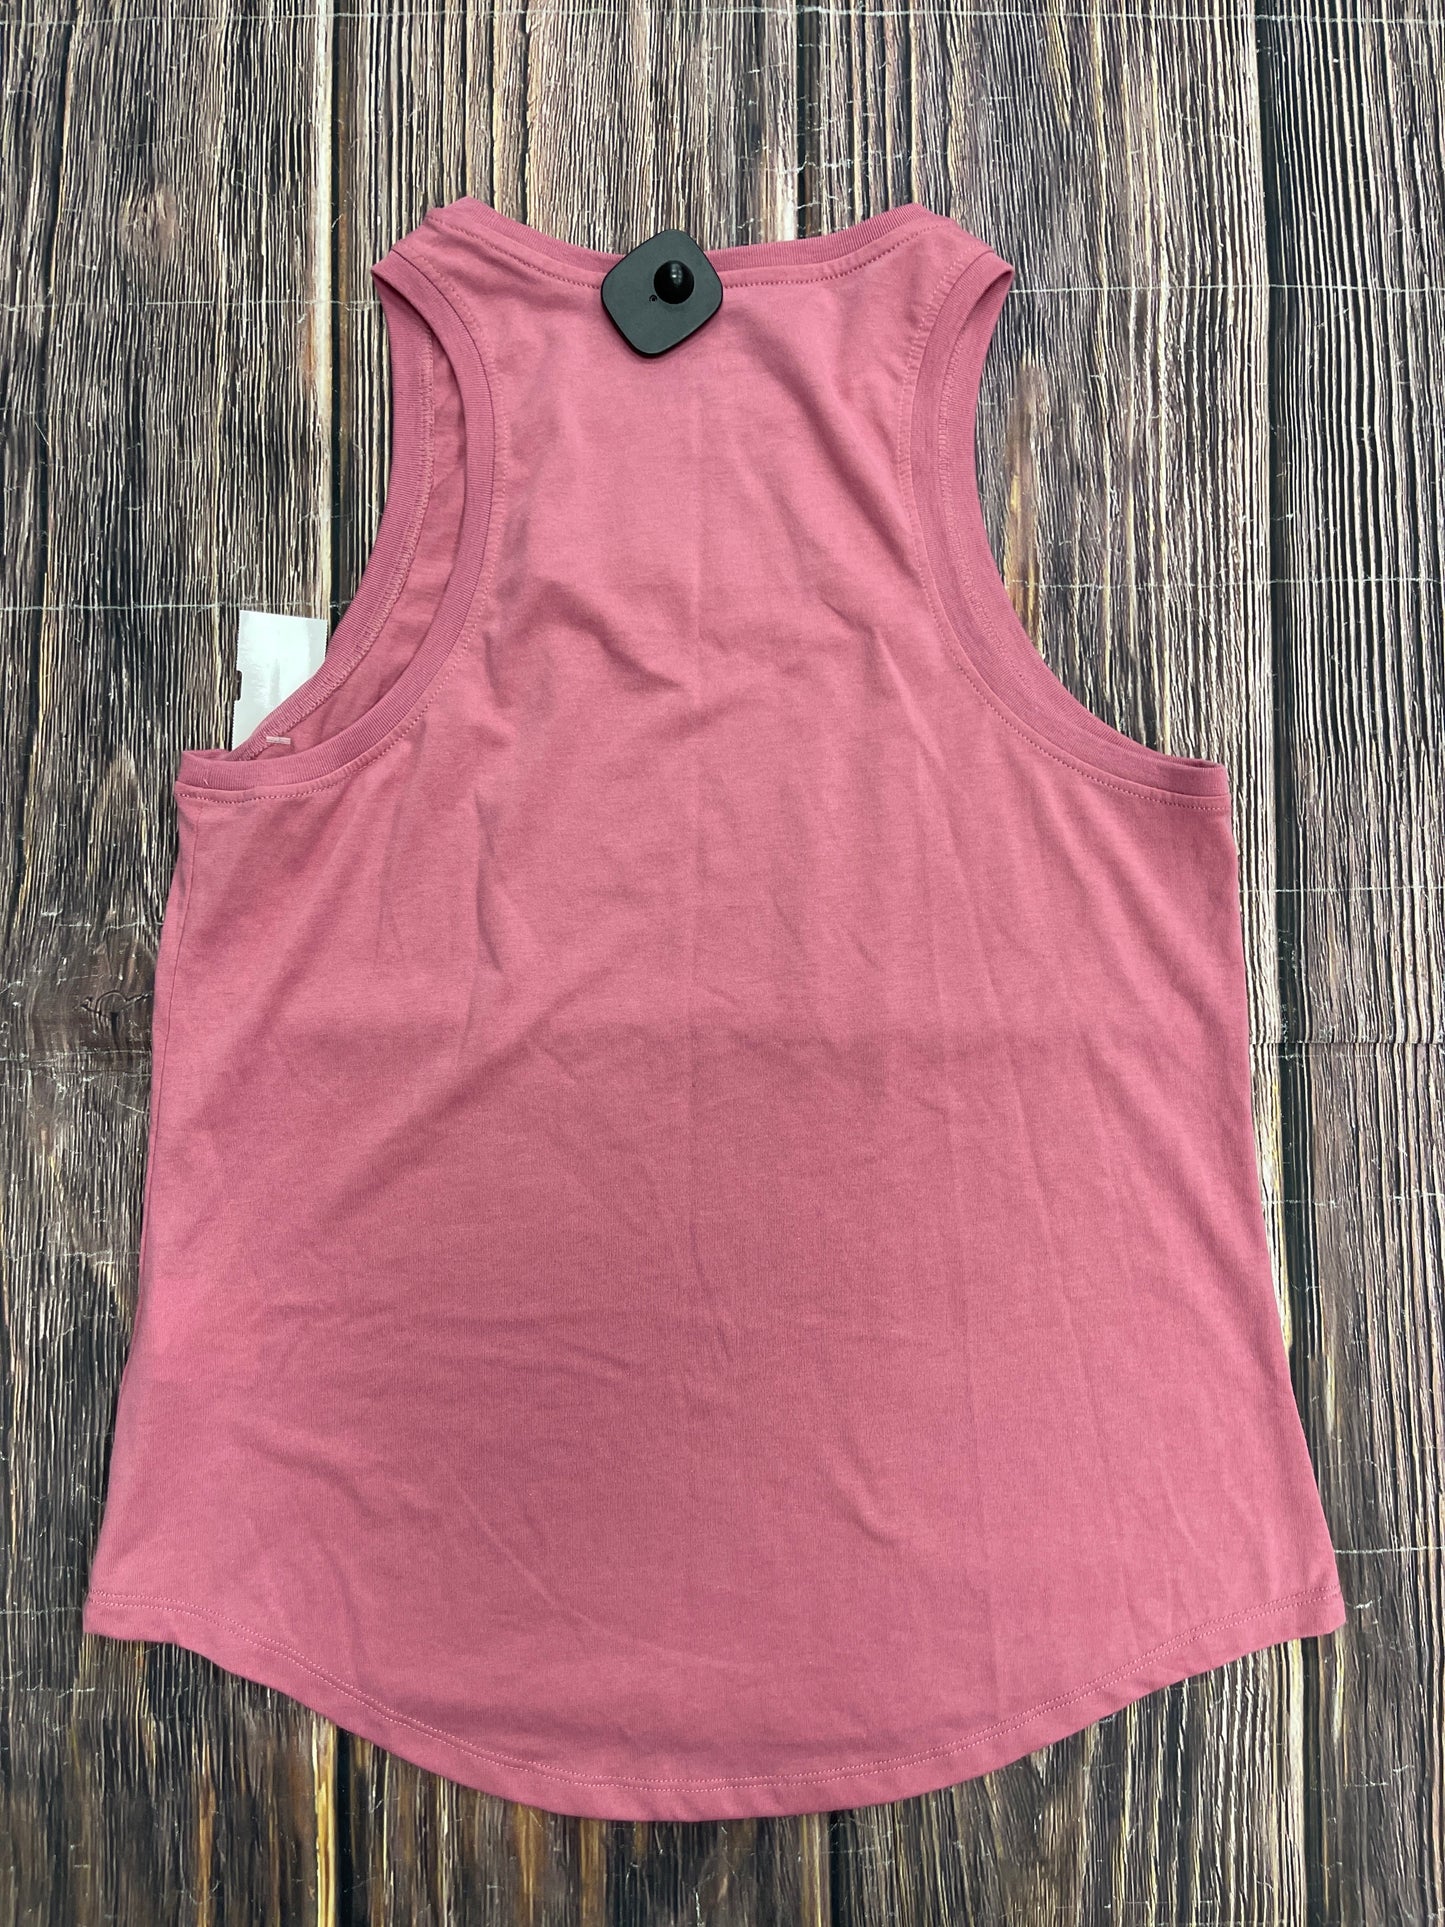 Pink Athletic Tank Top Nike, Size M